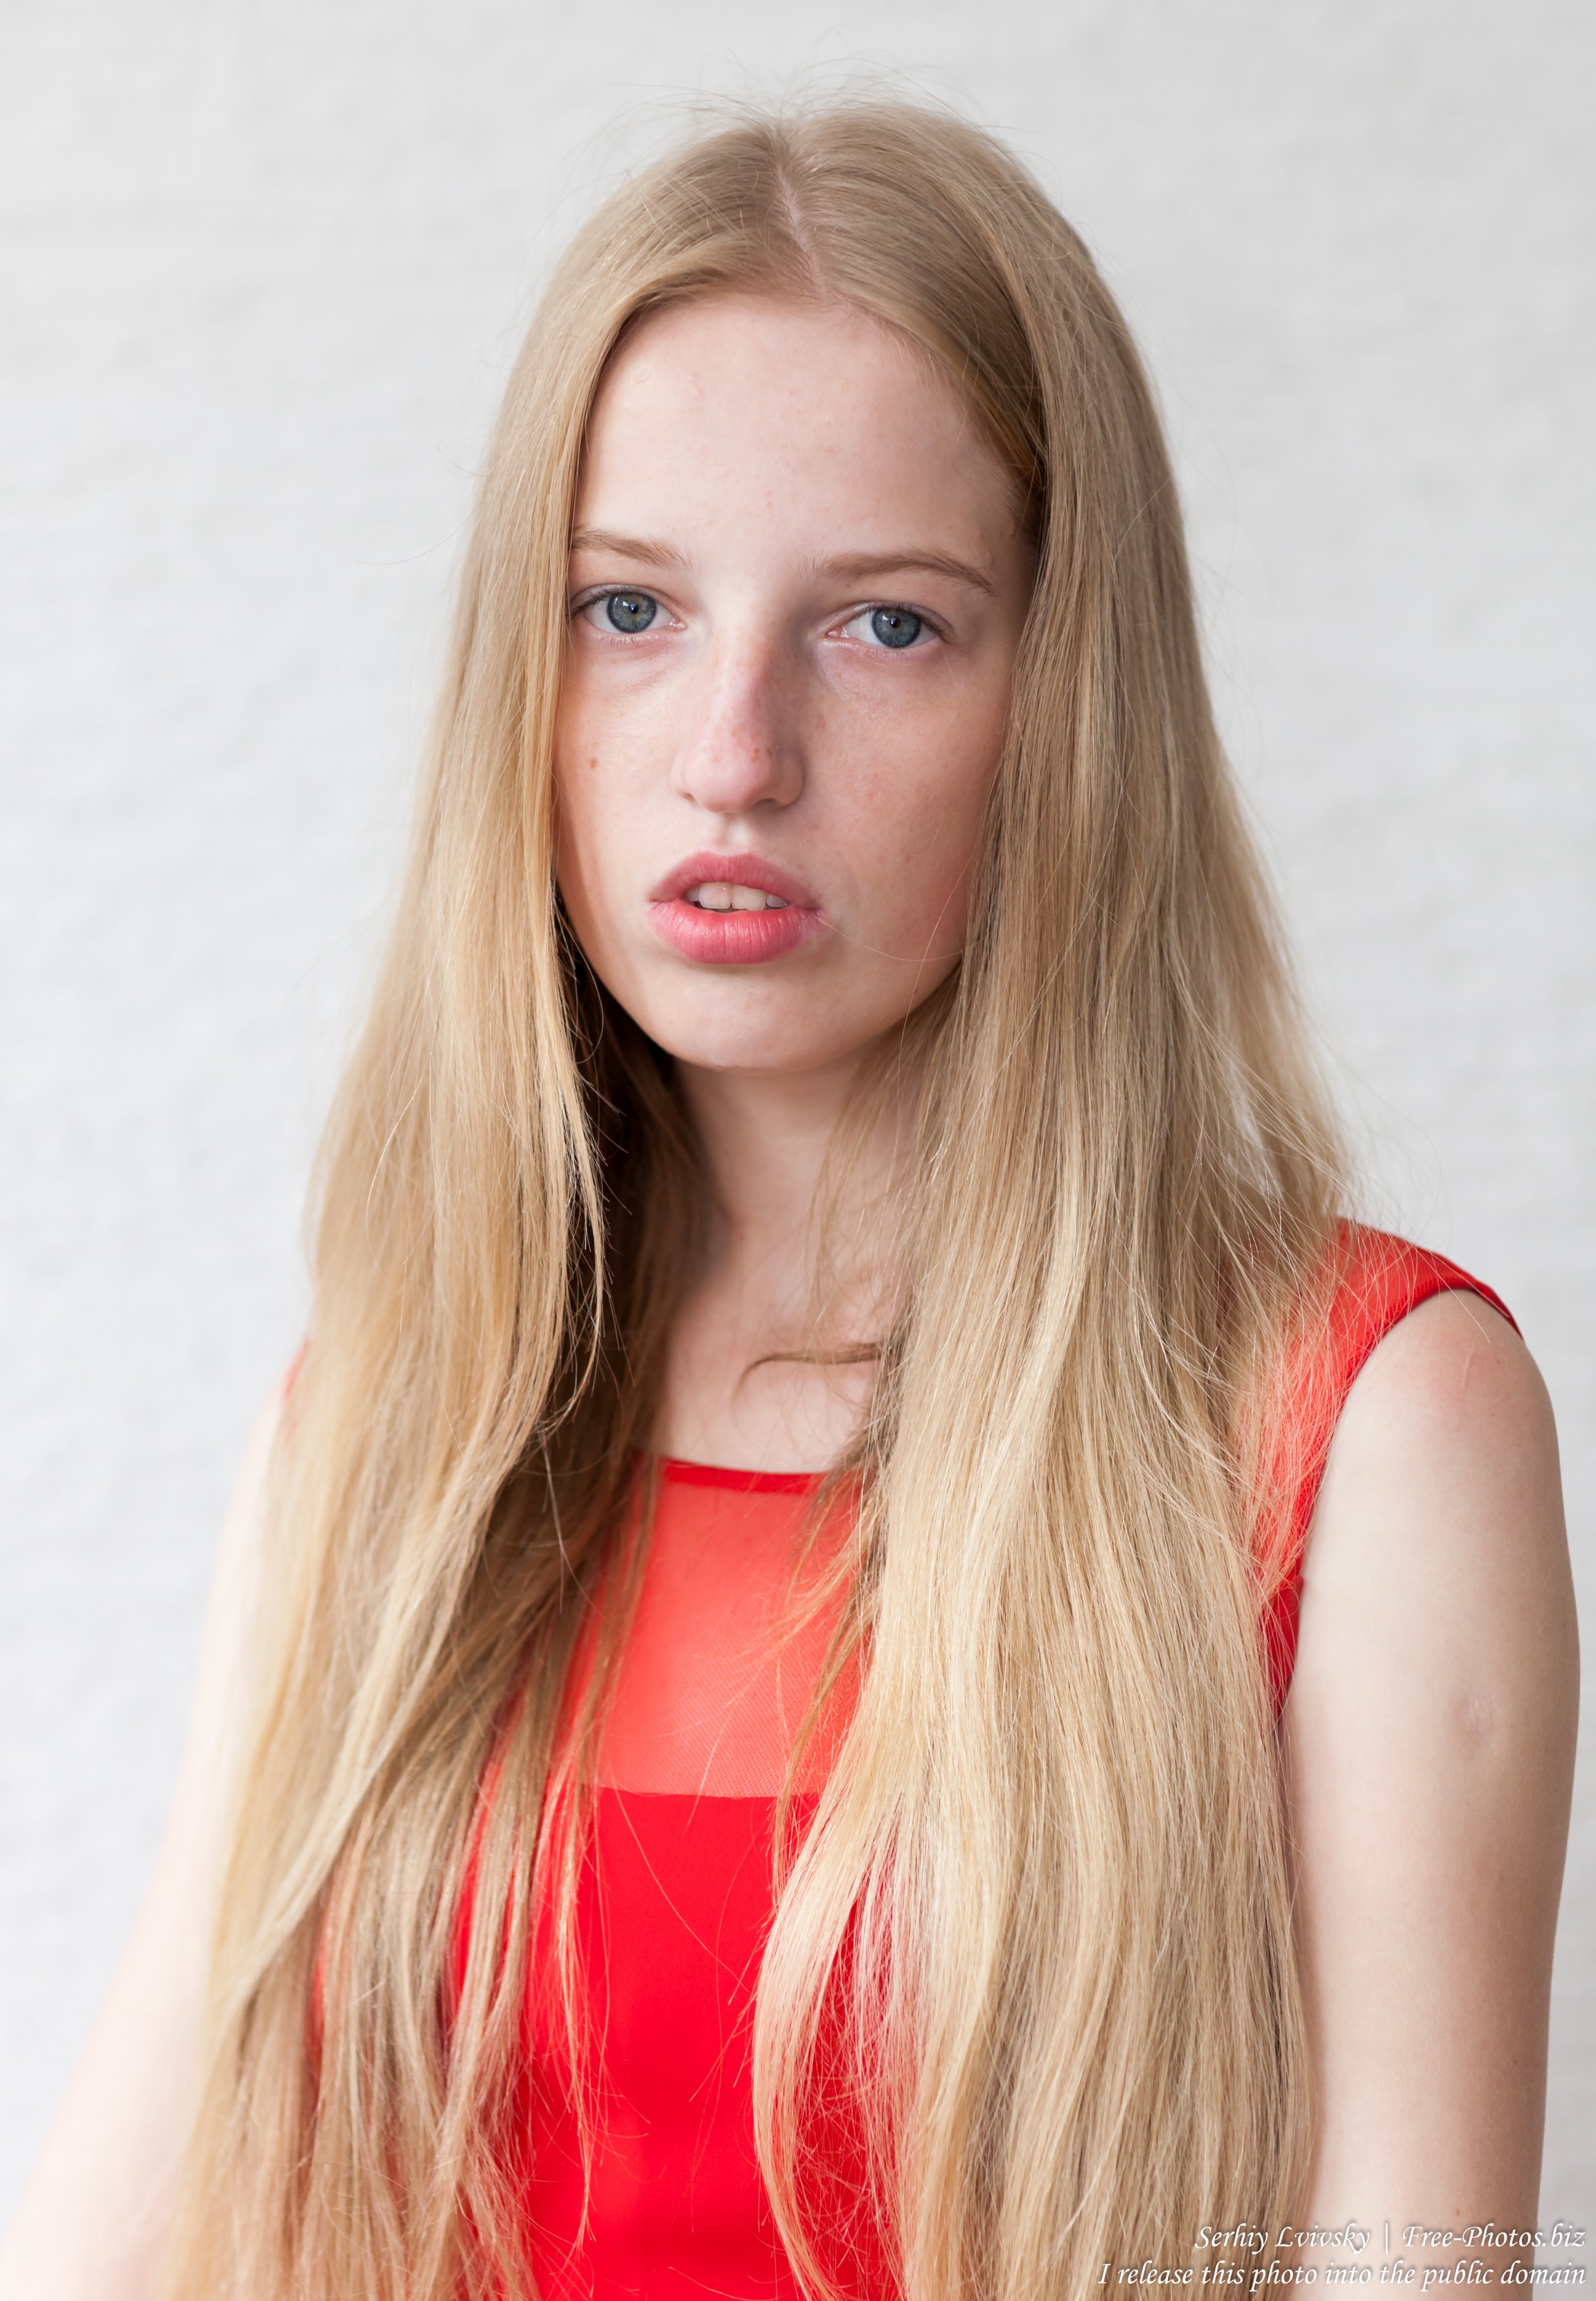 a 17-year-old Catholic natural blond girl photographed in September 2016 by Serhiy Lvivsky, picture 14